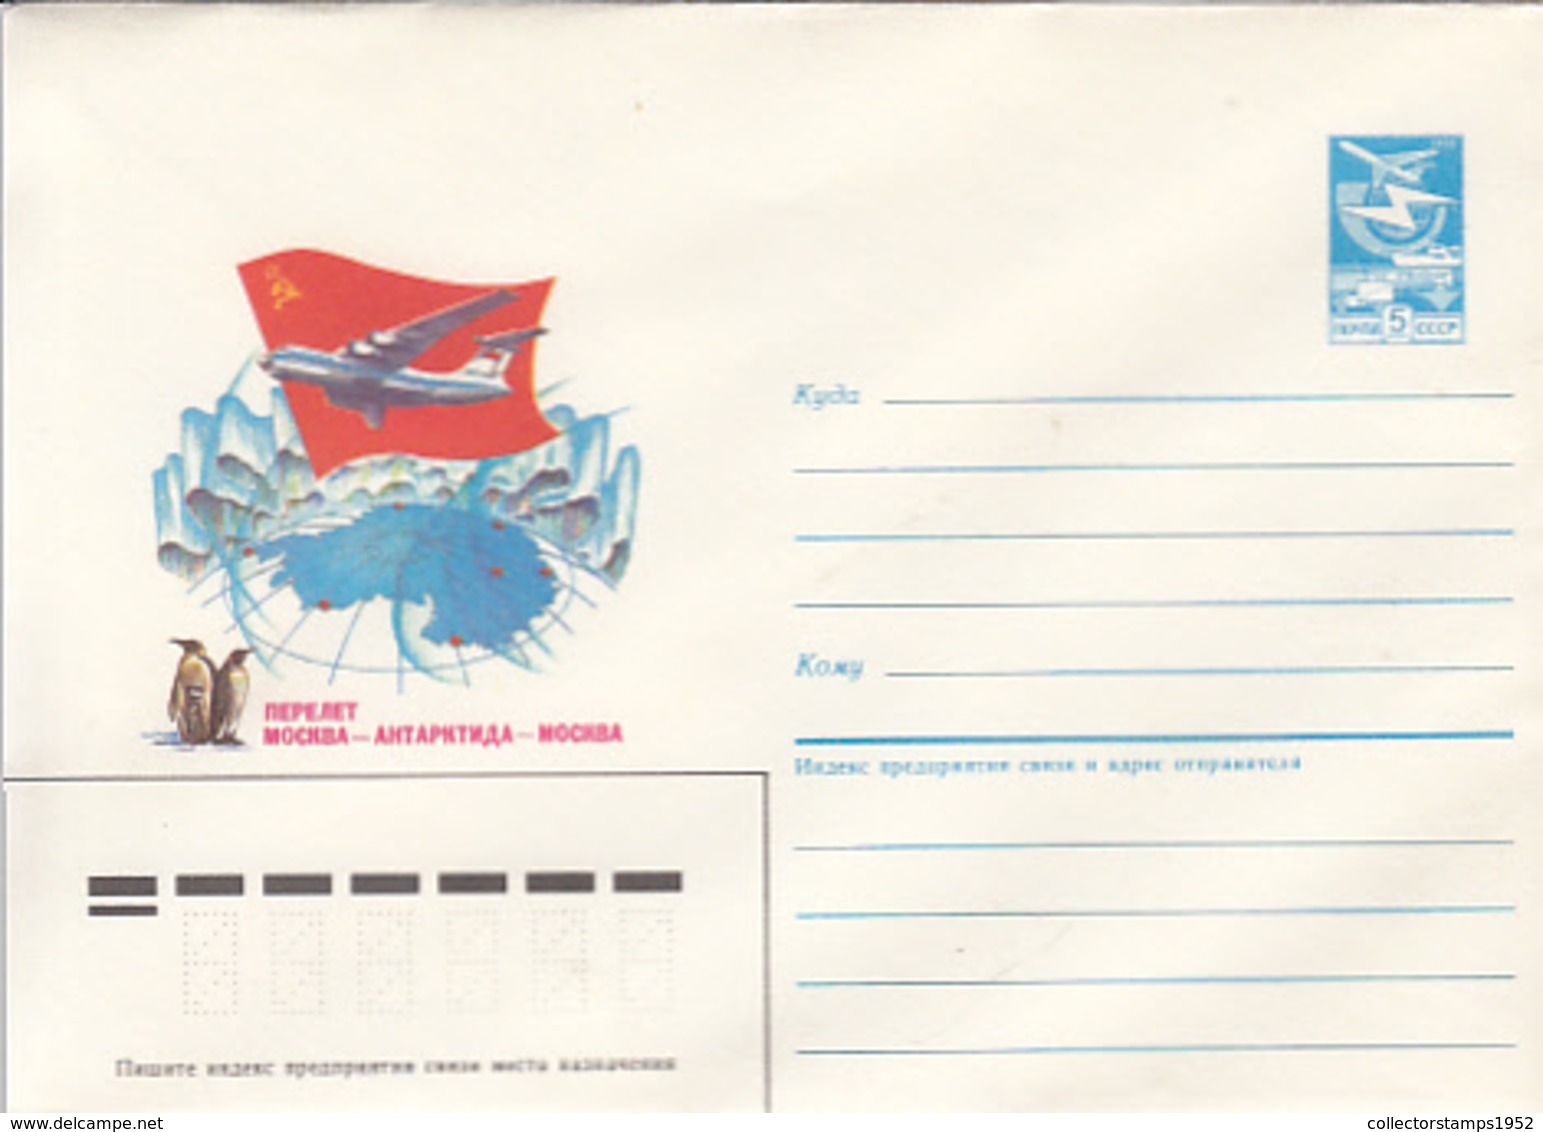 76398- MOSCOW-ANTARCTICA-MOSCOW FLIGHT, PLANE, PENGUINS, POLAR FLIGHTS, COVER STATIONERY, 1986, RUSSIA-USSR - Poolvluchten